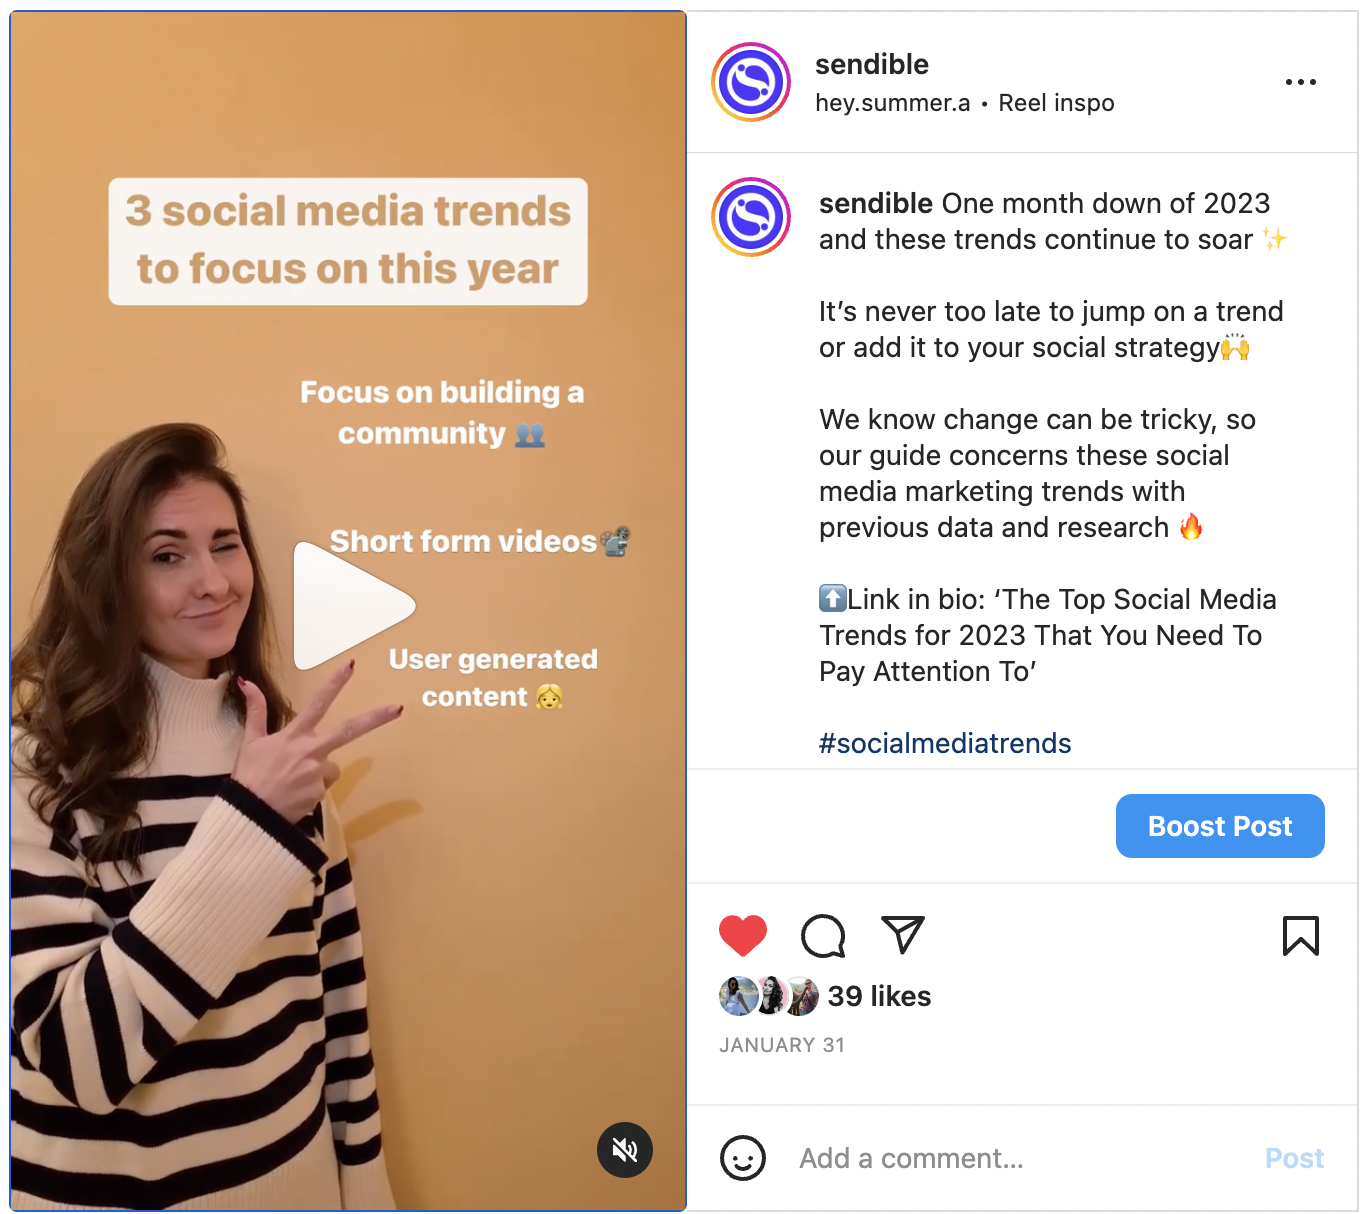 Screenshot of a Instagram reel post by Sendible and 3 social media trends to focus on this year